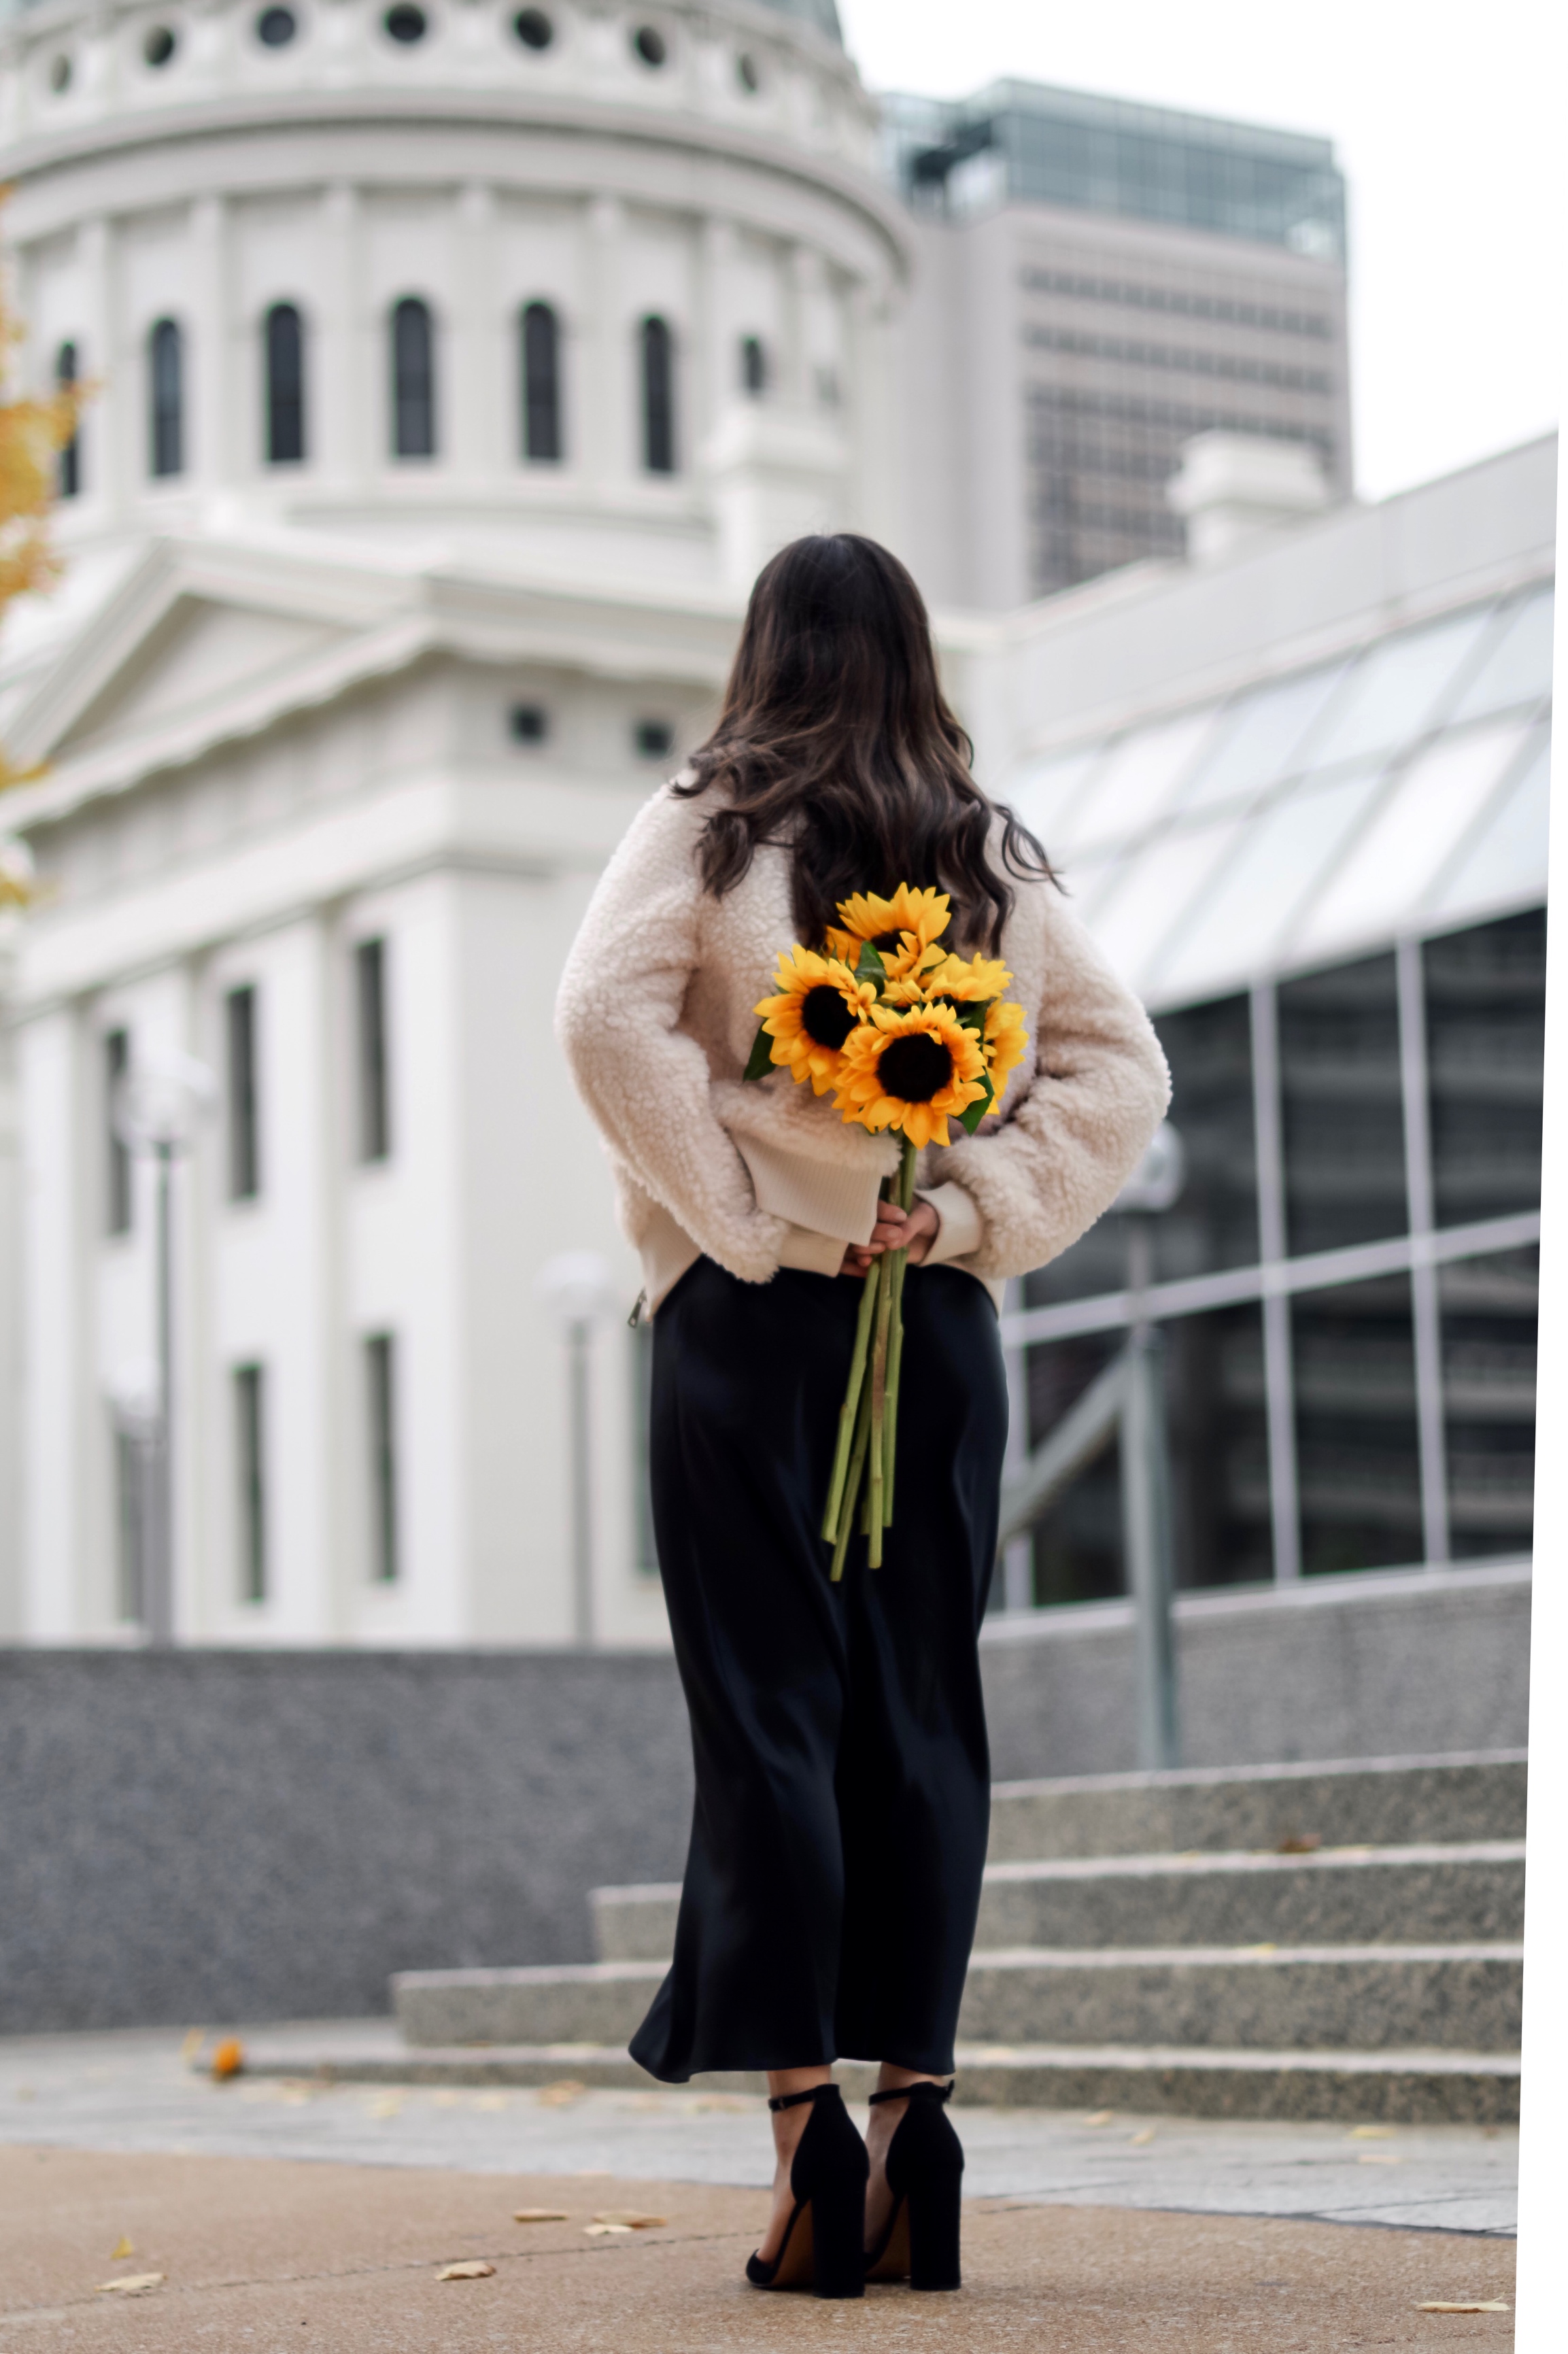 The 10 Most Frustrating Parts Of Brand Collabs Long Black Slip Dress Shearling Jacket Esther Santer Fashion Blog NYC Street Style Blogger Outfit OOTD Trendy Shopping St. Louis Photoshoot Hometown Downtown Saint Louis Sunflowers Yellow  Flowers Heels.jpg